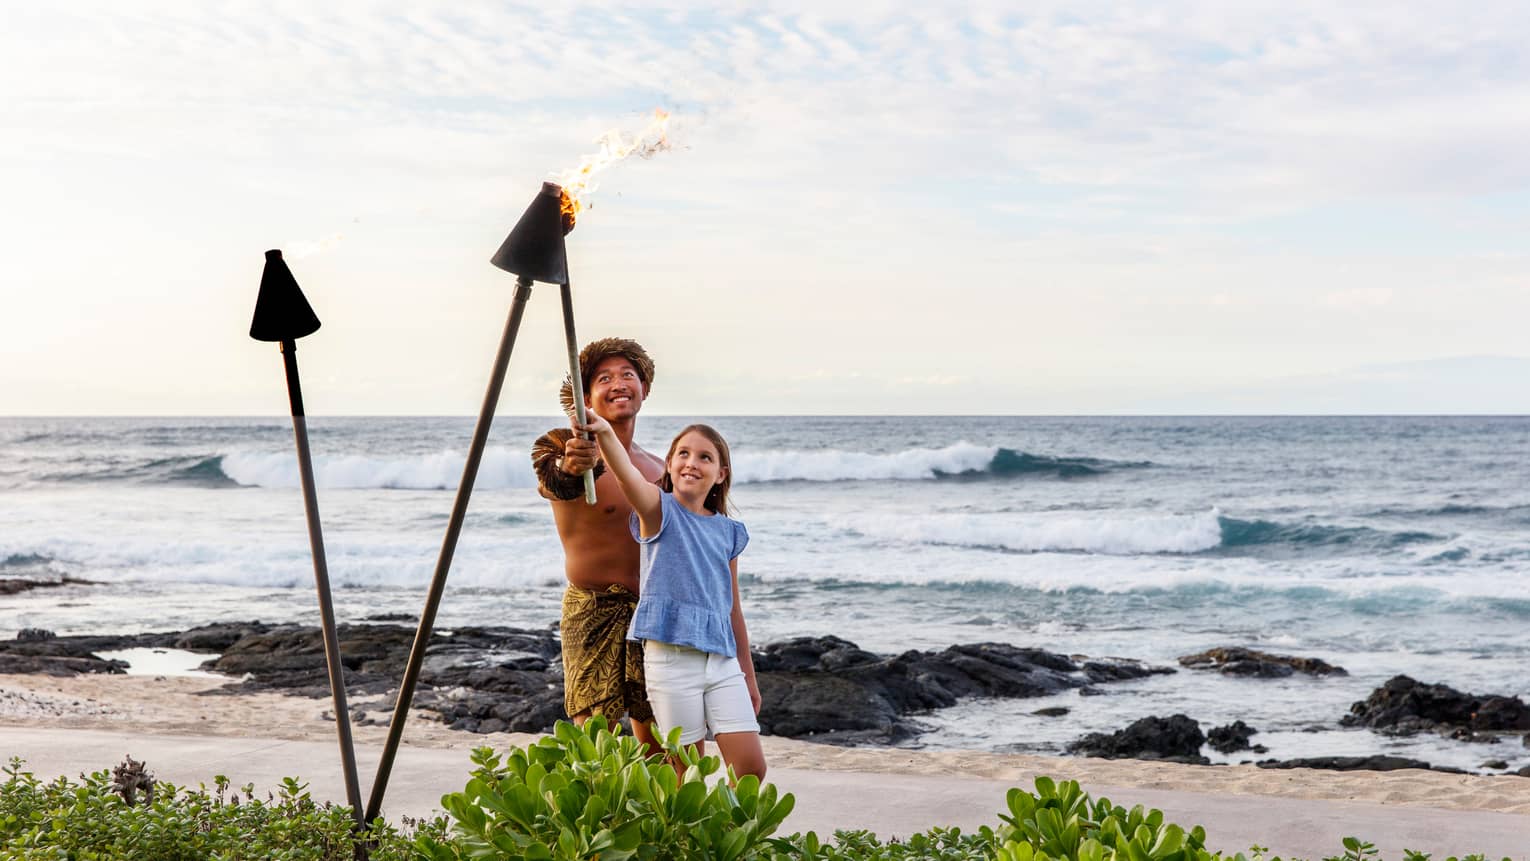 A father and daughter lighting lanterns along a beach shore together.